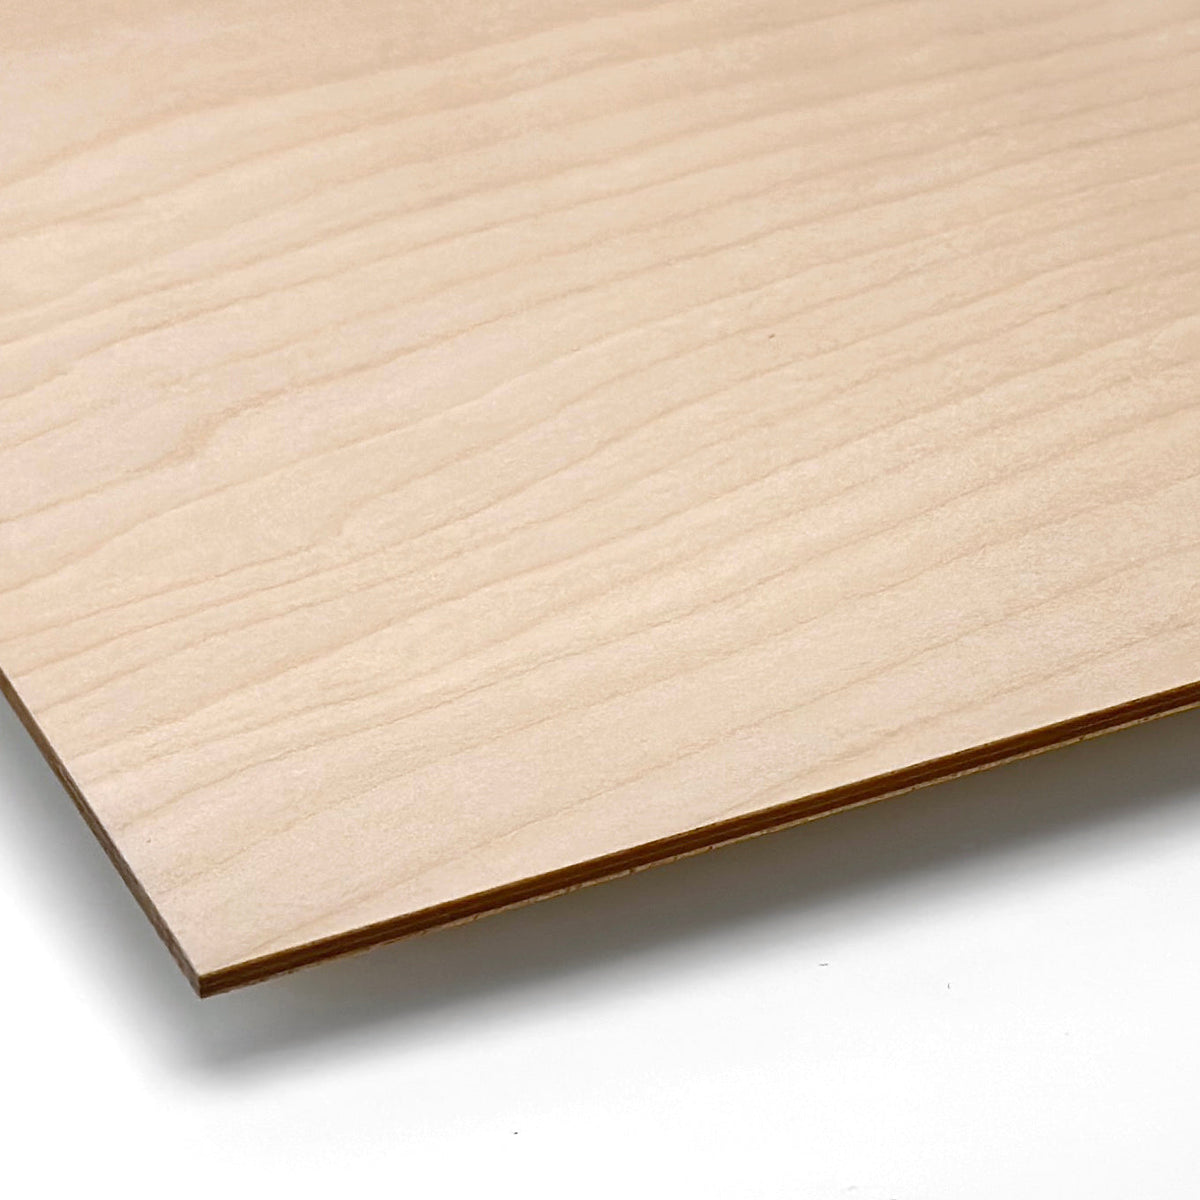 3mm Birch plywood with laser cutting & single sided printing - 300x200mm